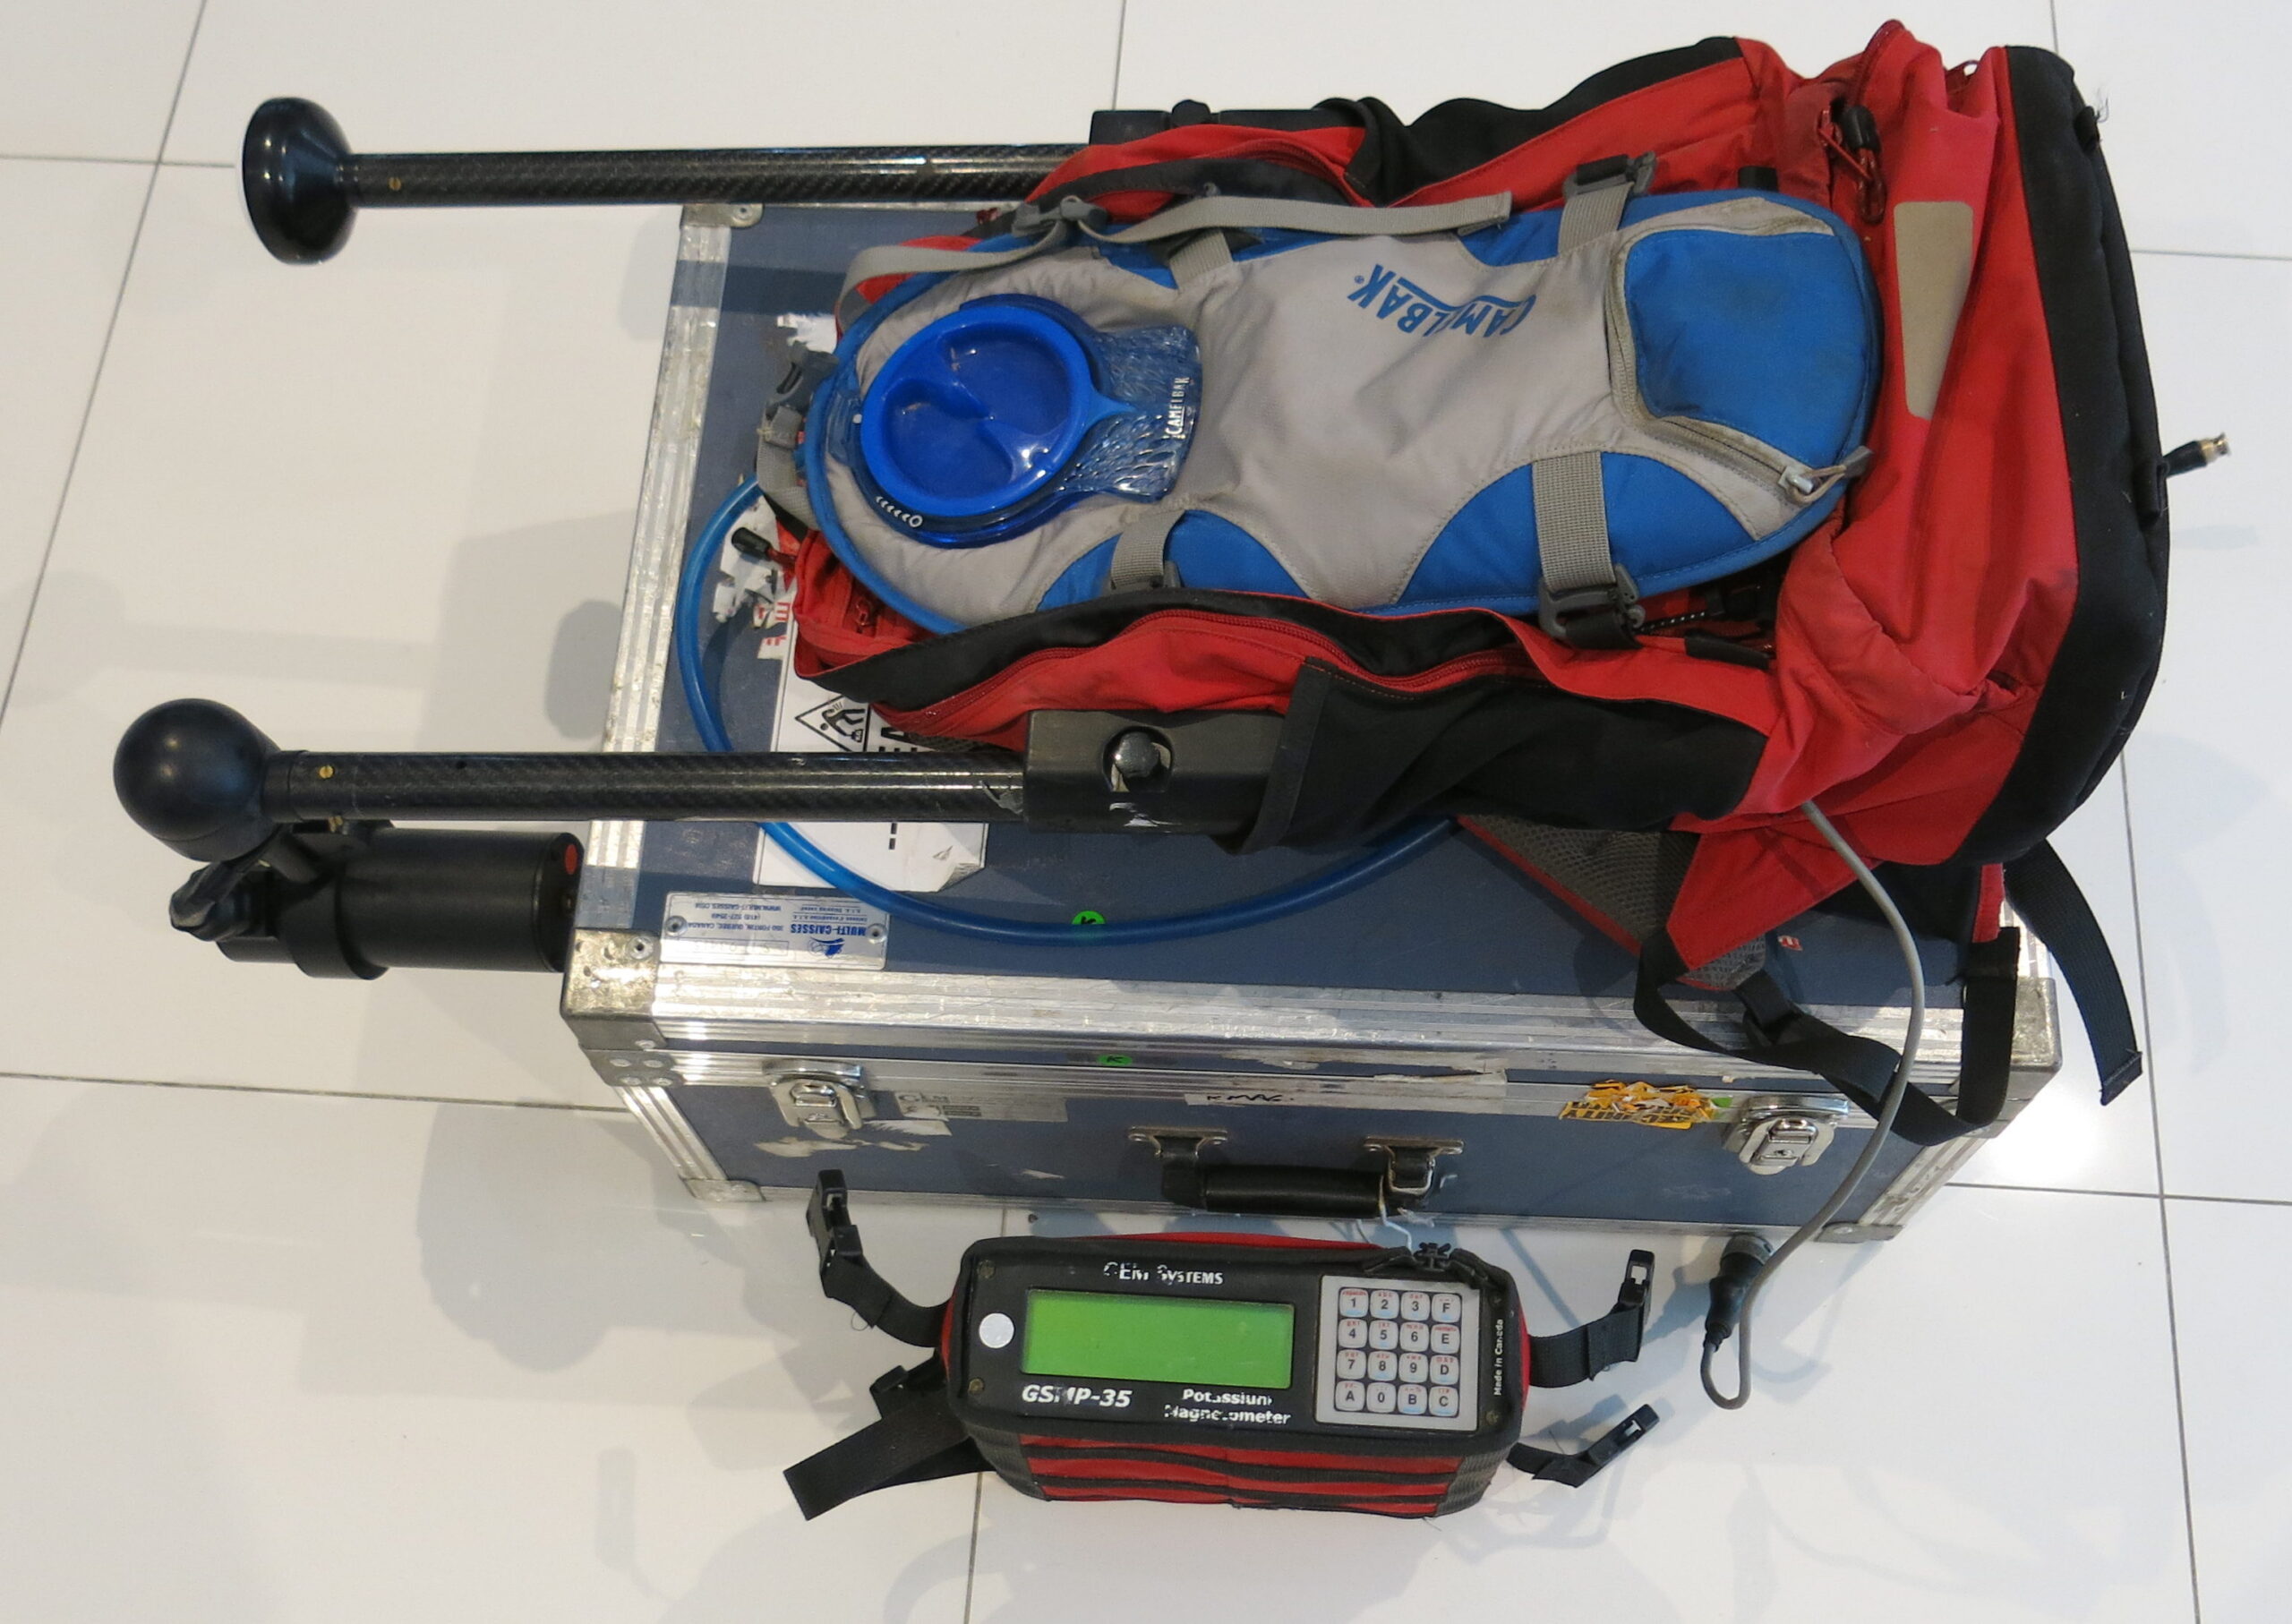 Used GEM Systems GSMP35 Potassium magnetometer with GPS for sale (SOLD)